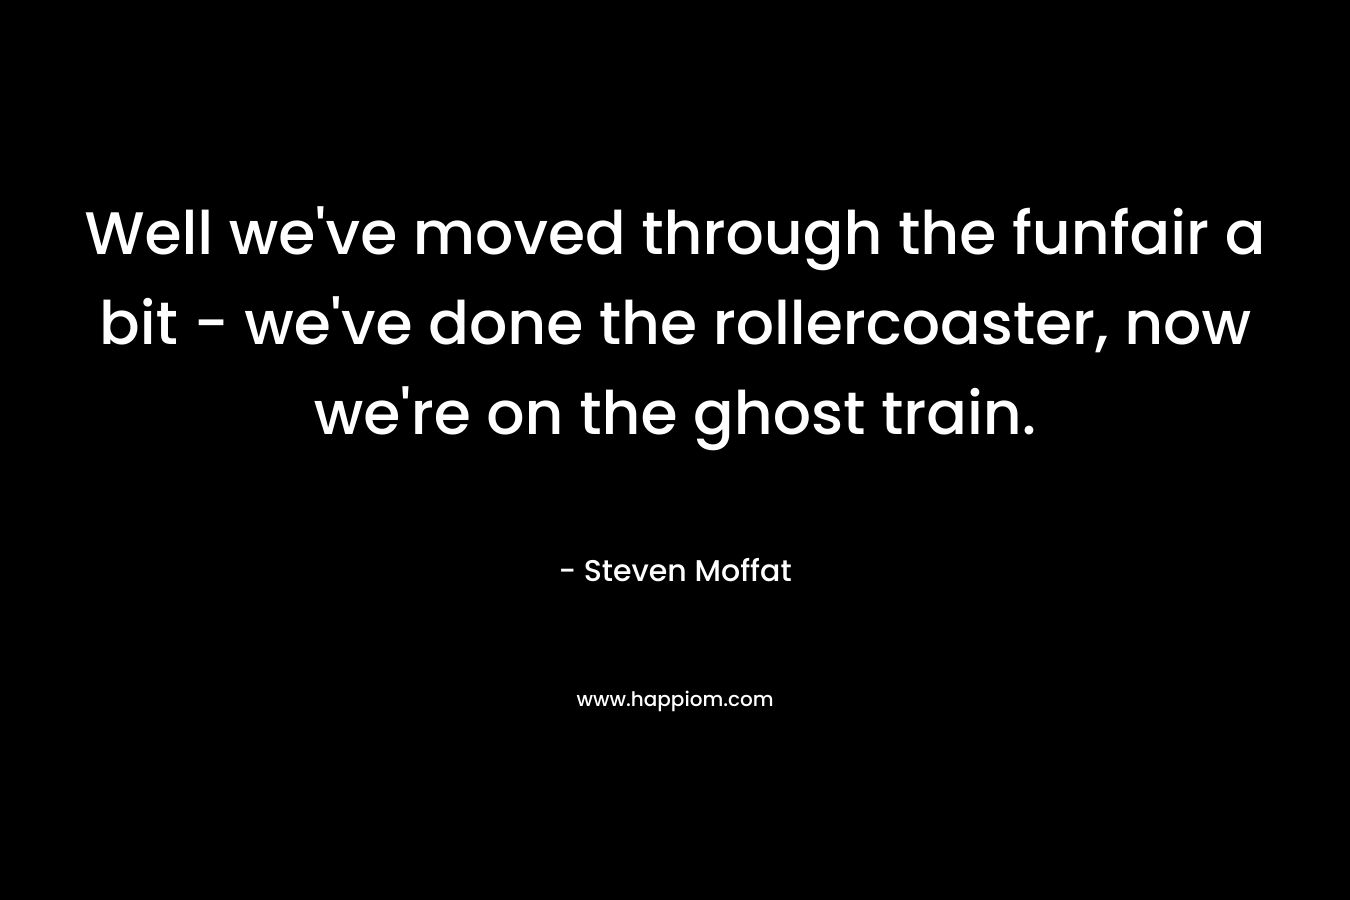 Well we’ve moved through the funfair a bit – we’ve done the rollercoaster, now we’re on the ghost train. – Steven Moffat